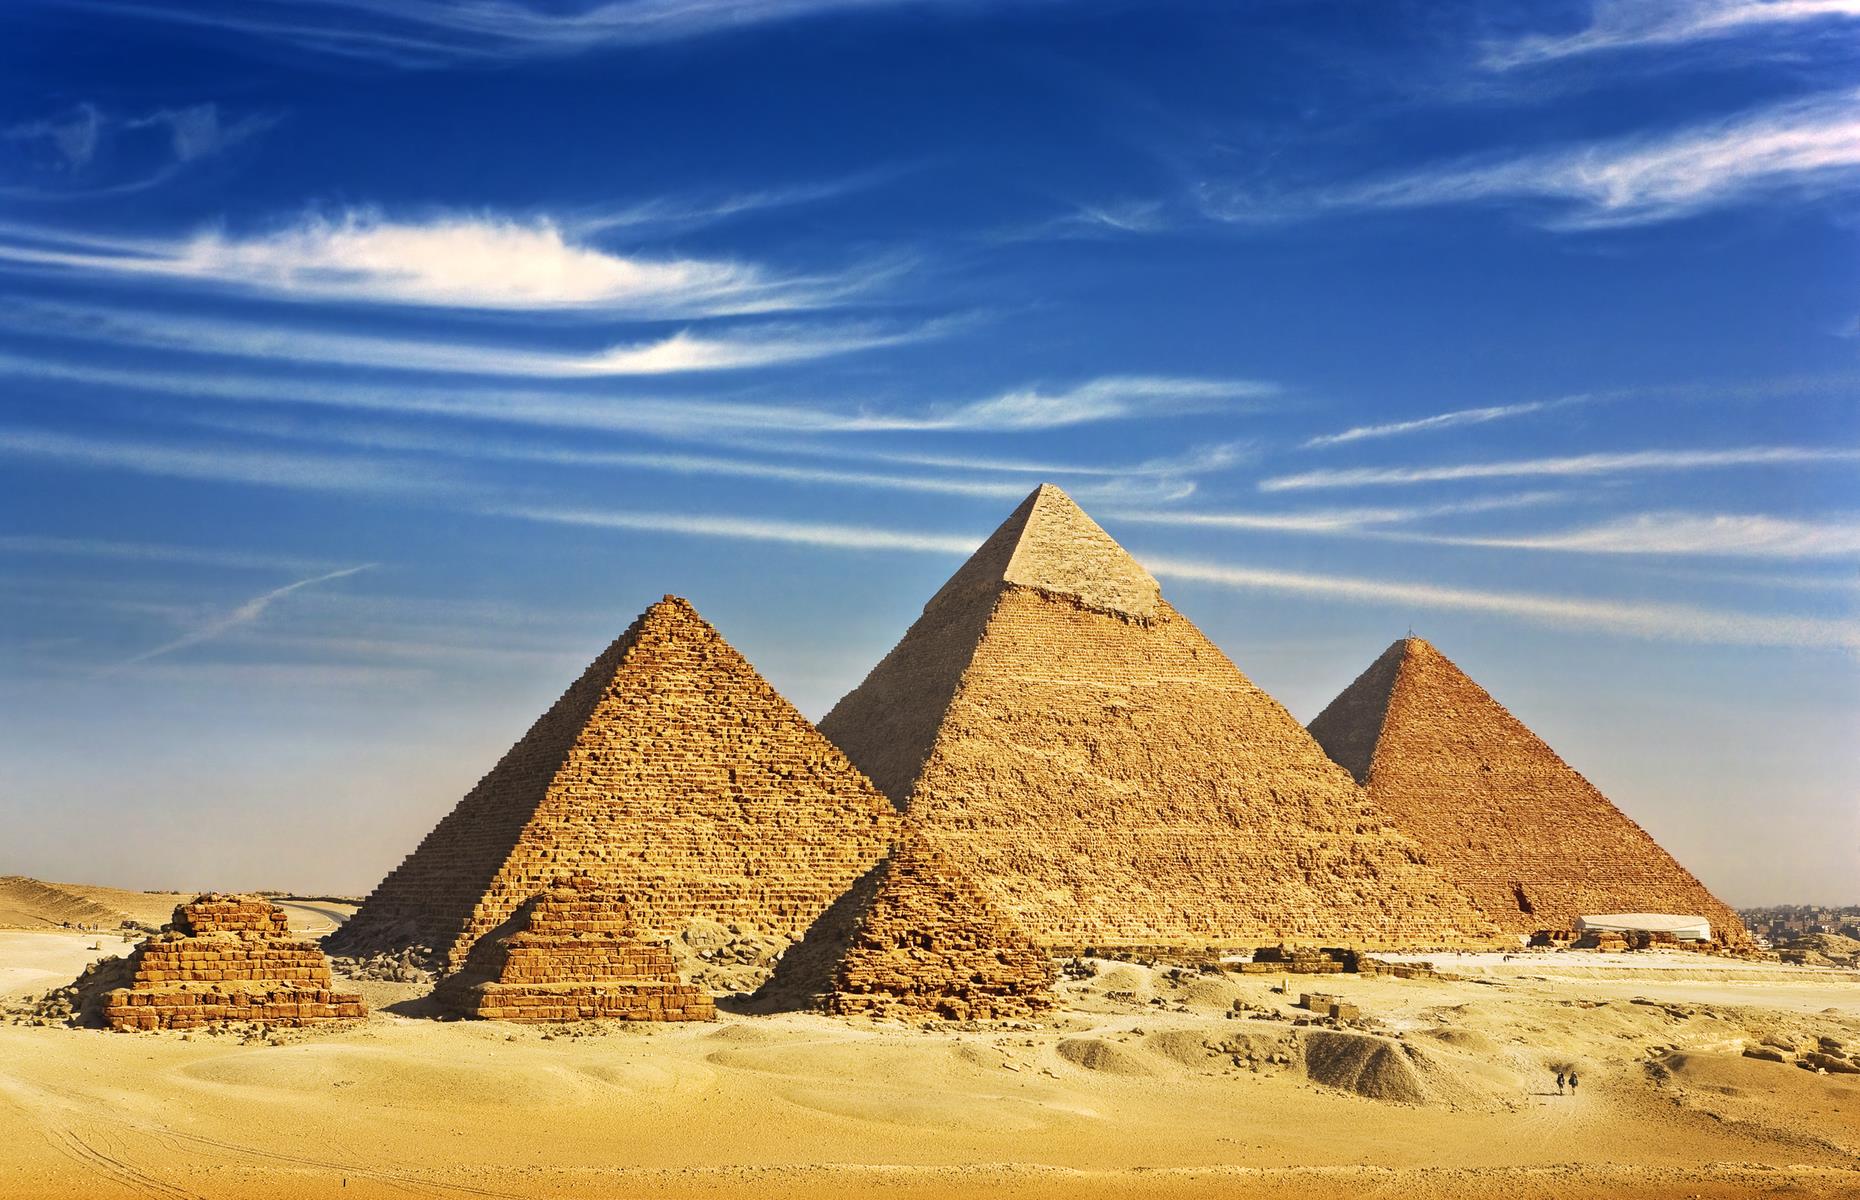 <p>The gigantic pyramids of Giza have stood on the edge of the desert plateau near Cairo for nearly five millennia. The oldest is the Great Pyramid, built around roughly 2550 to 2490 BC to entomb the pharaoh Khufu (Cheops). As the only remaining wonder of the ancient world, the pyramids cannot fail to amaze with their age and scale. To see the treasures of this far-reaching civilization though, you must visit the Egyptian Museum in central Cairo. It is home to an astonishing collection of ancient Egyptian artifacts.</p>